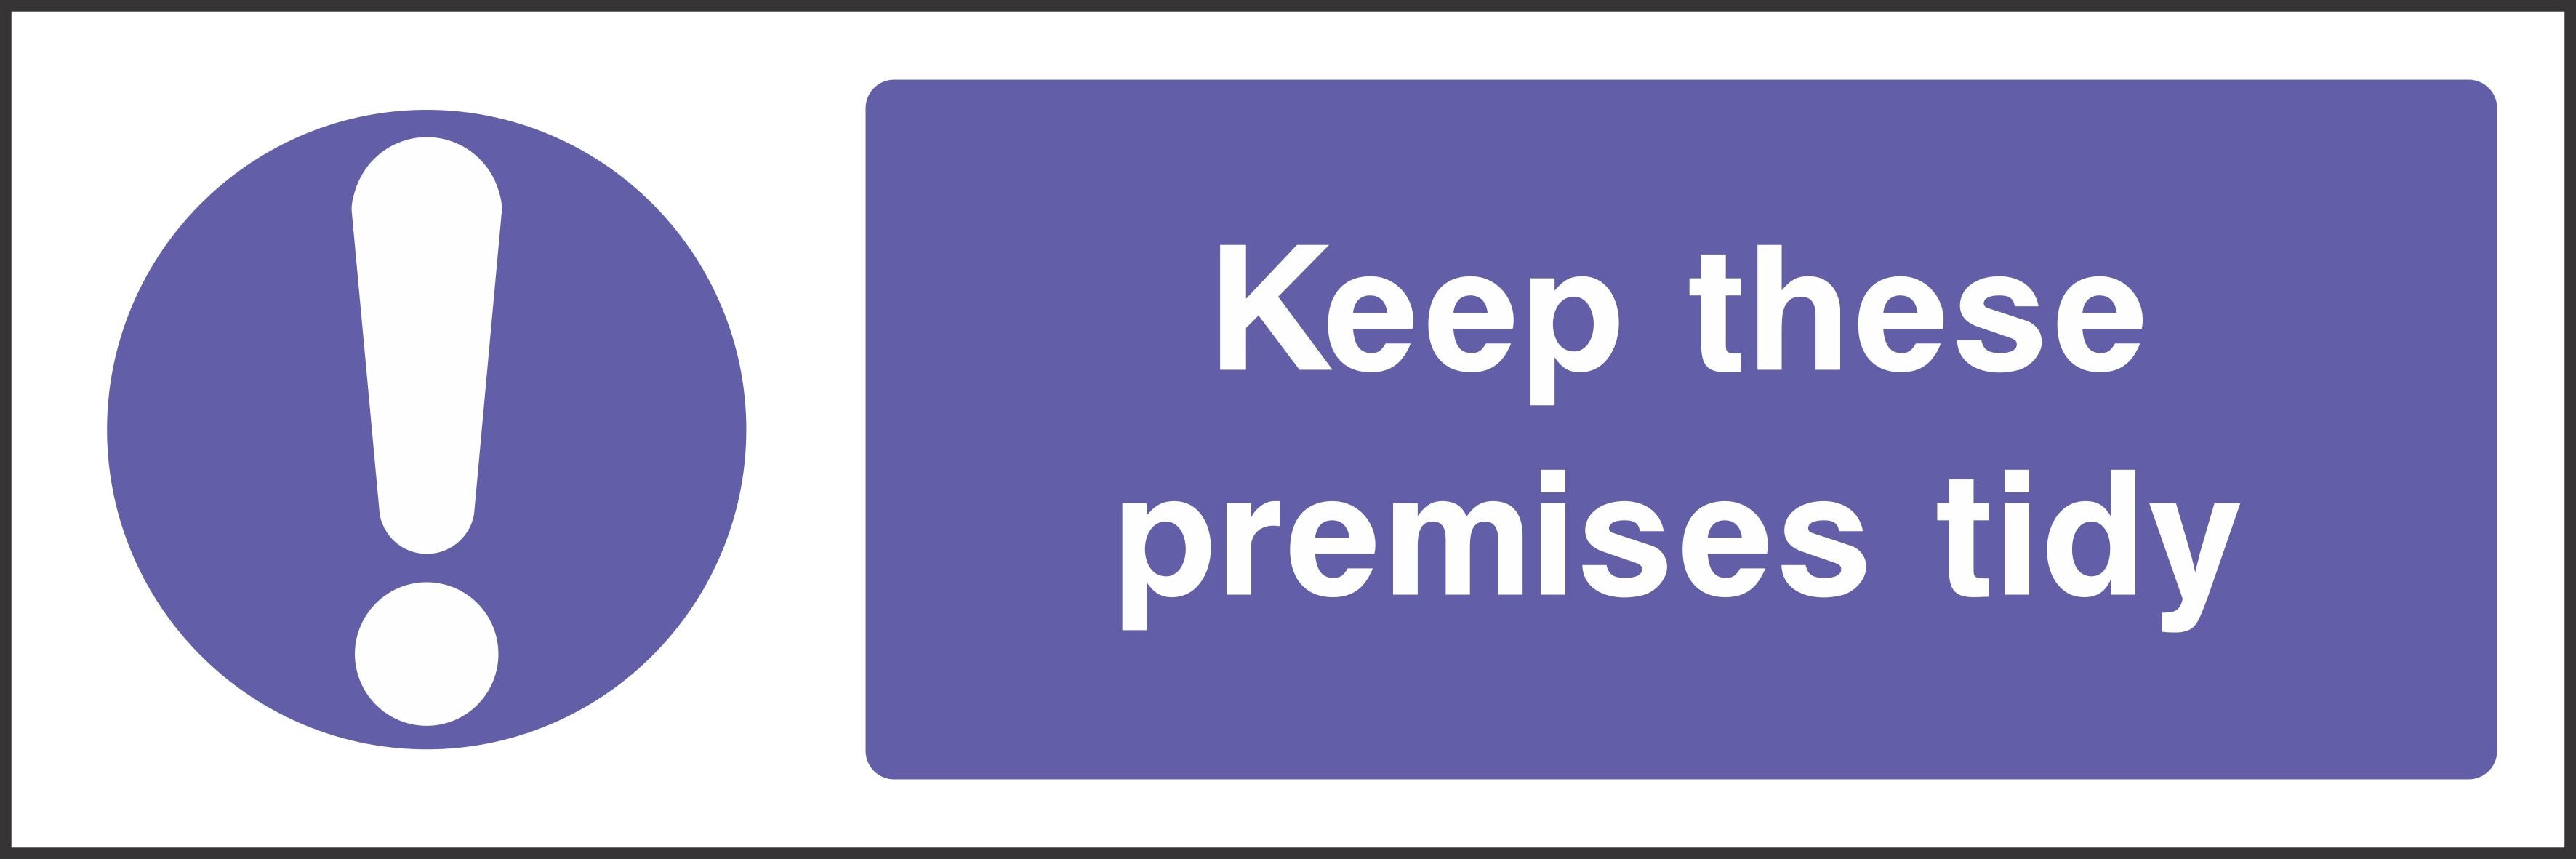 Keep these premises tidy sign